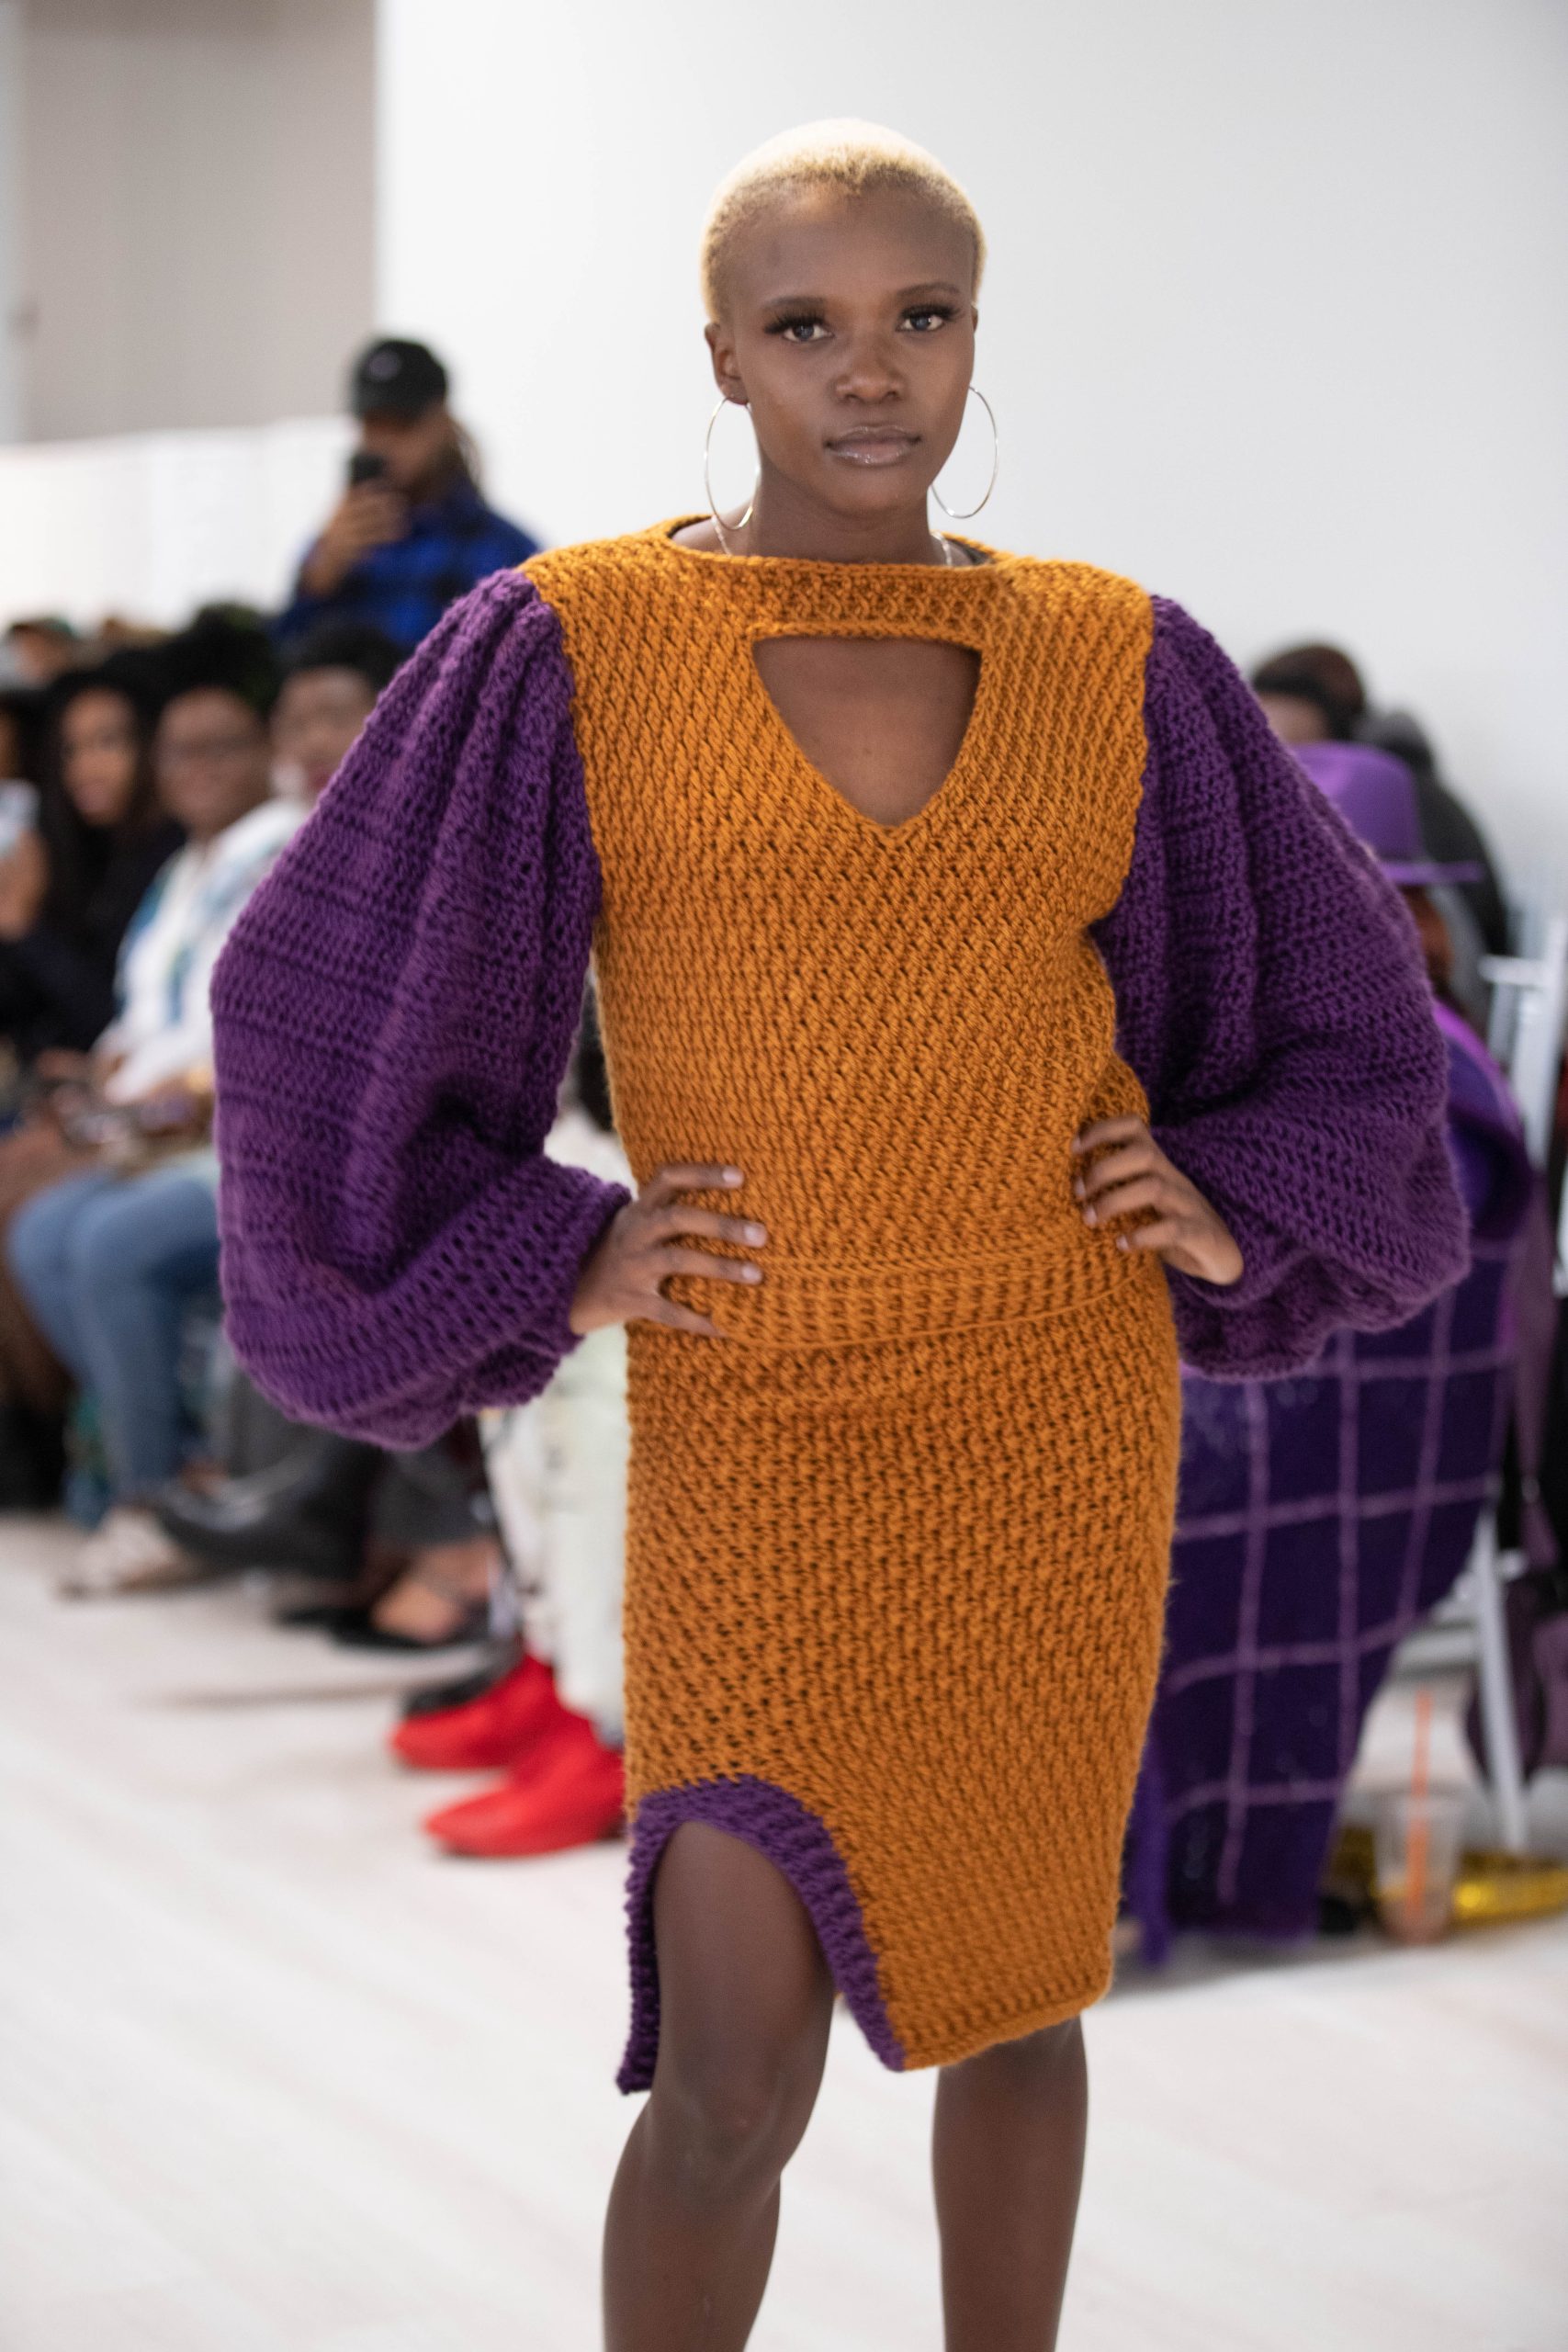 An image of an African American woman with short blonde hair wearing a crochet sweater and skirt. The crochet sweater has a triangle opening above the breasts, purple balloon sleeves and the body is a golden caramel color. The Skirt matches in color, but has a split on the right leg that is lined in purple ribbing.